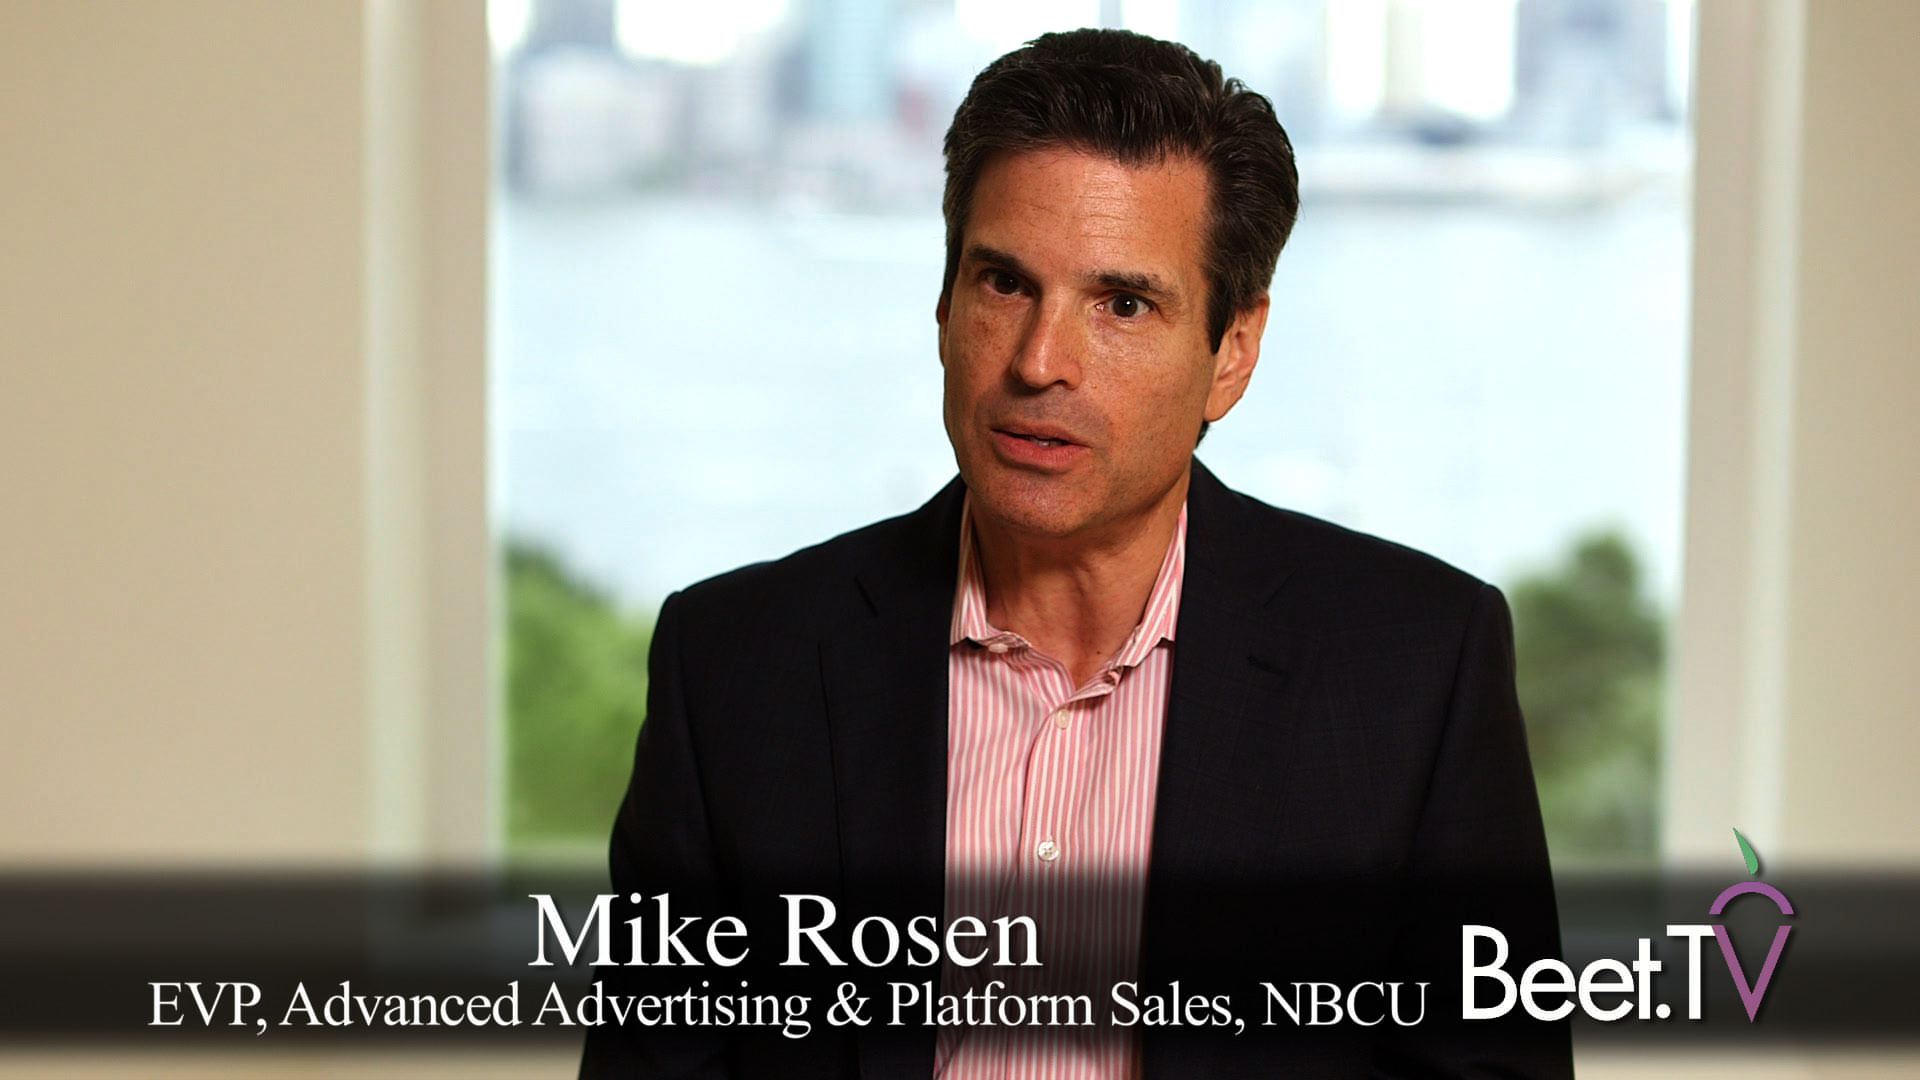 Greater Focus On Outcomes Will Yield More Credit For TV Industry: NBCU’s Rosen